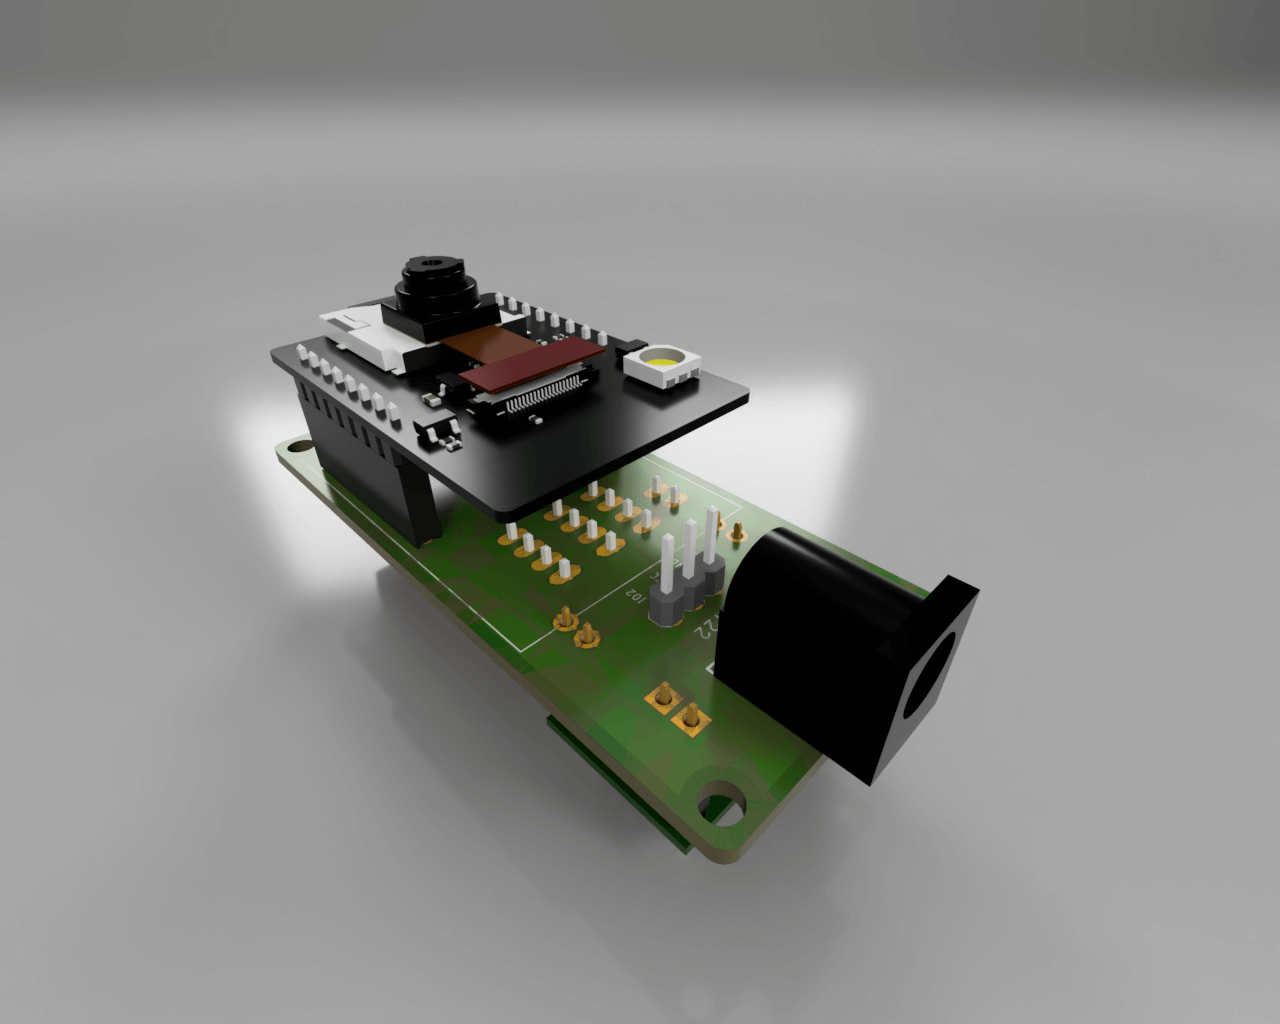 grass esp32 pcb board mounted render